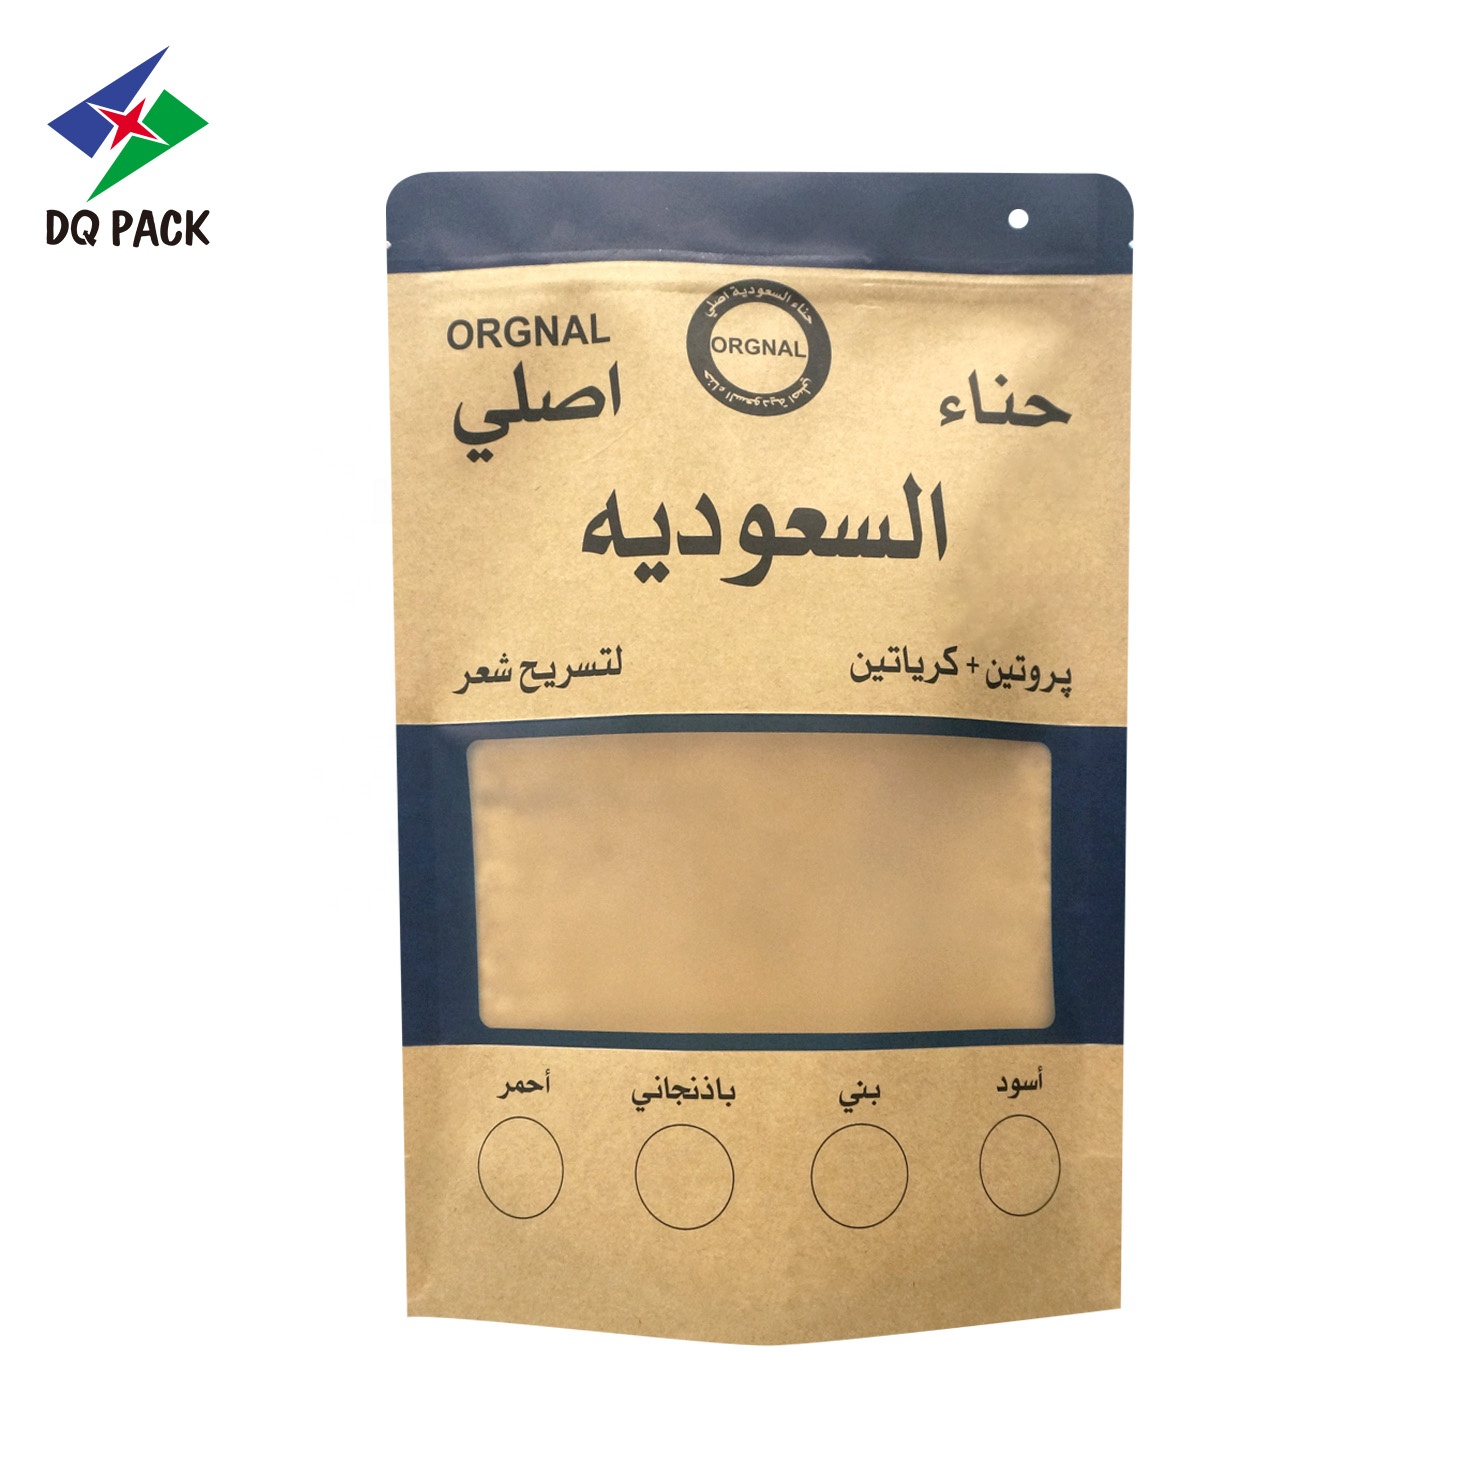 DQ PACK Custom Printing Kraft Paper Pouch Stand Up Food Zipper Bag With Window